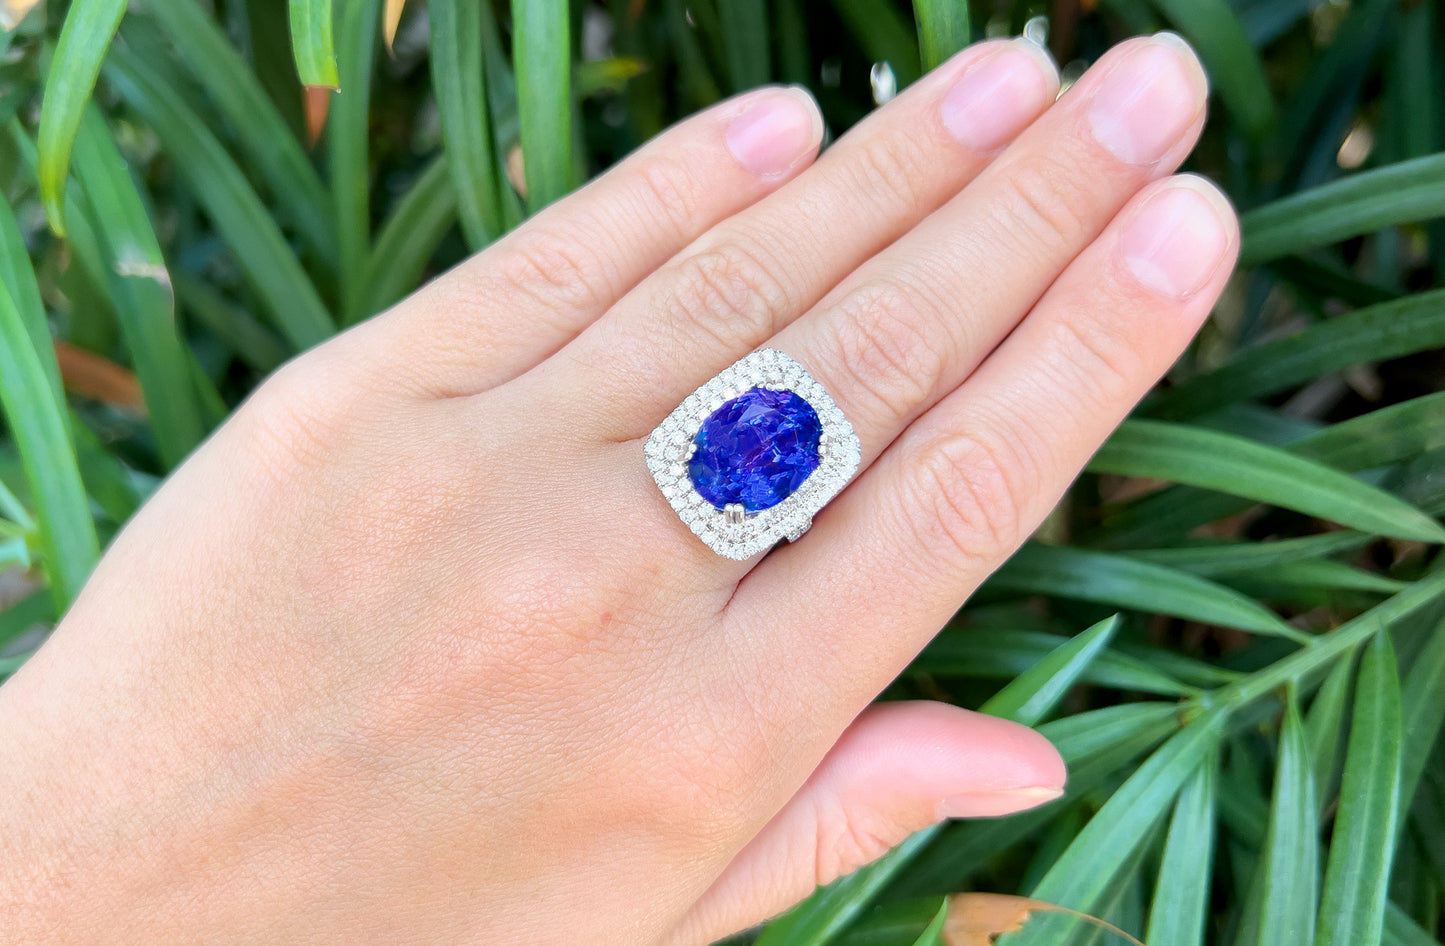 Gem Quality Tanzanite 12.50 Carat Ring With Double Diamond Halo 2.85 Carats Total 18K Gold